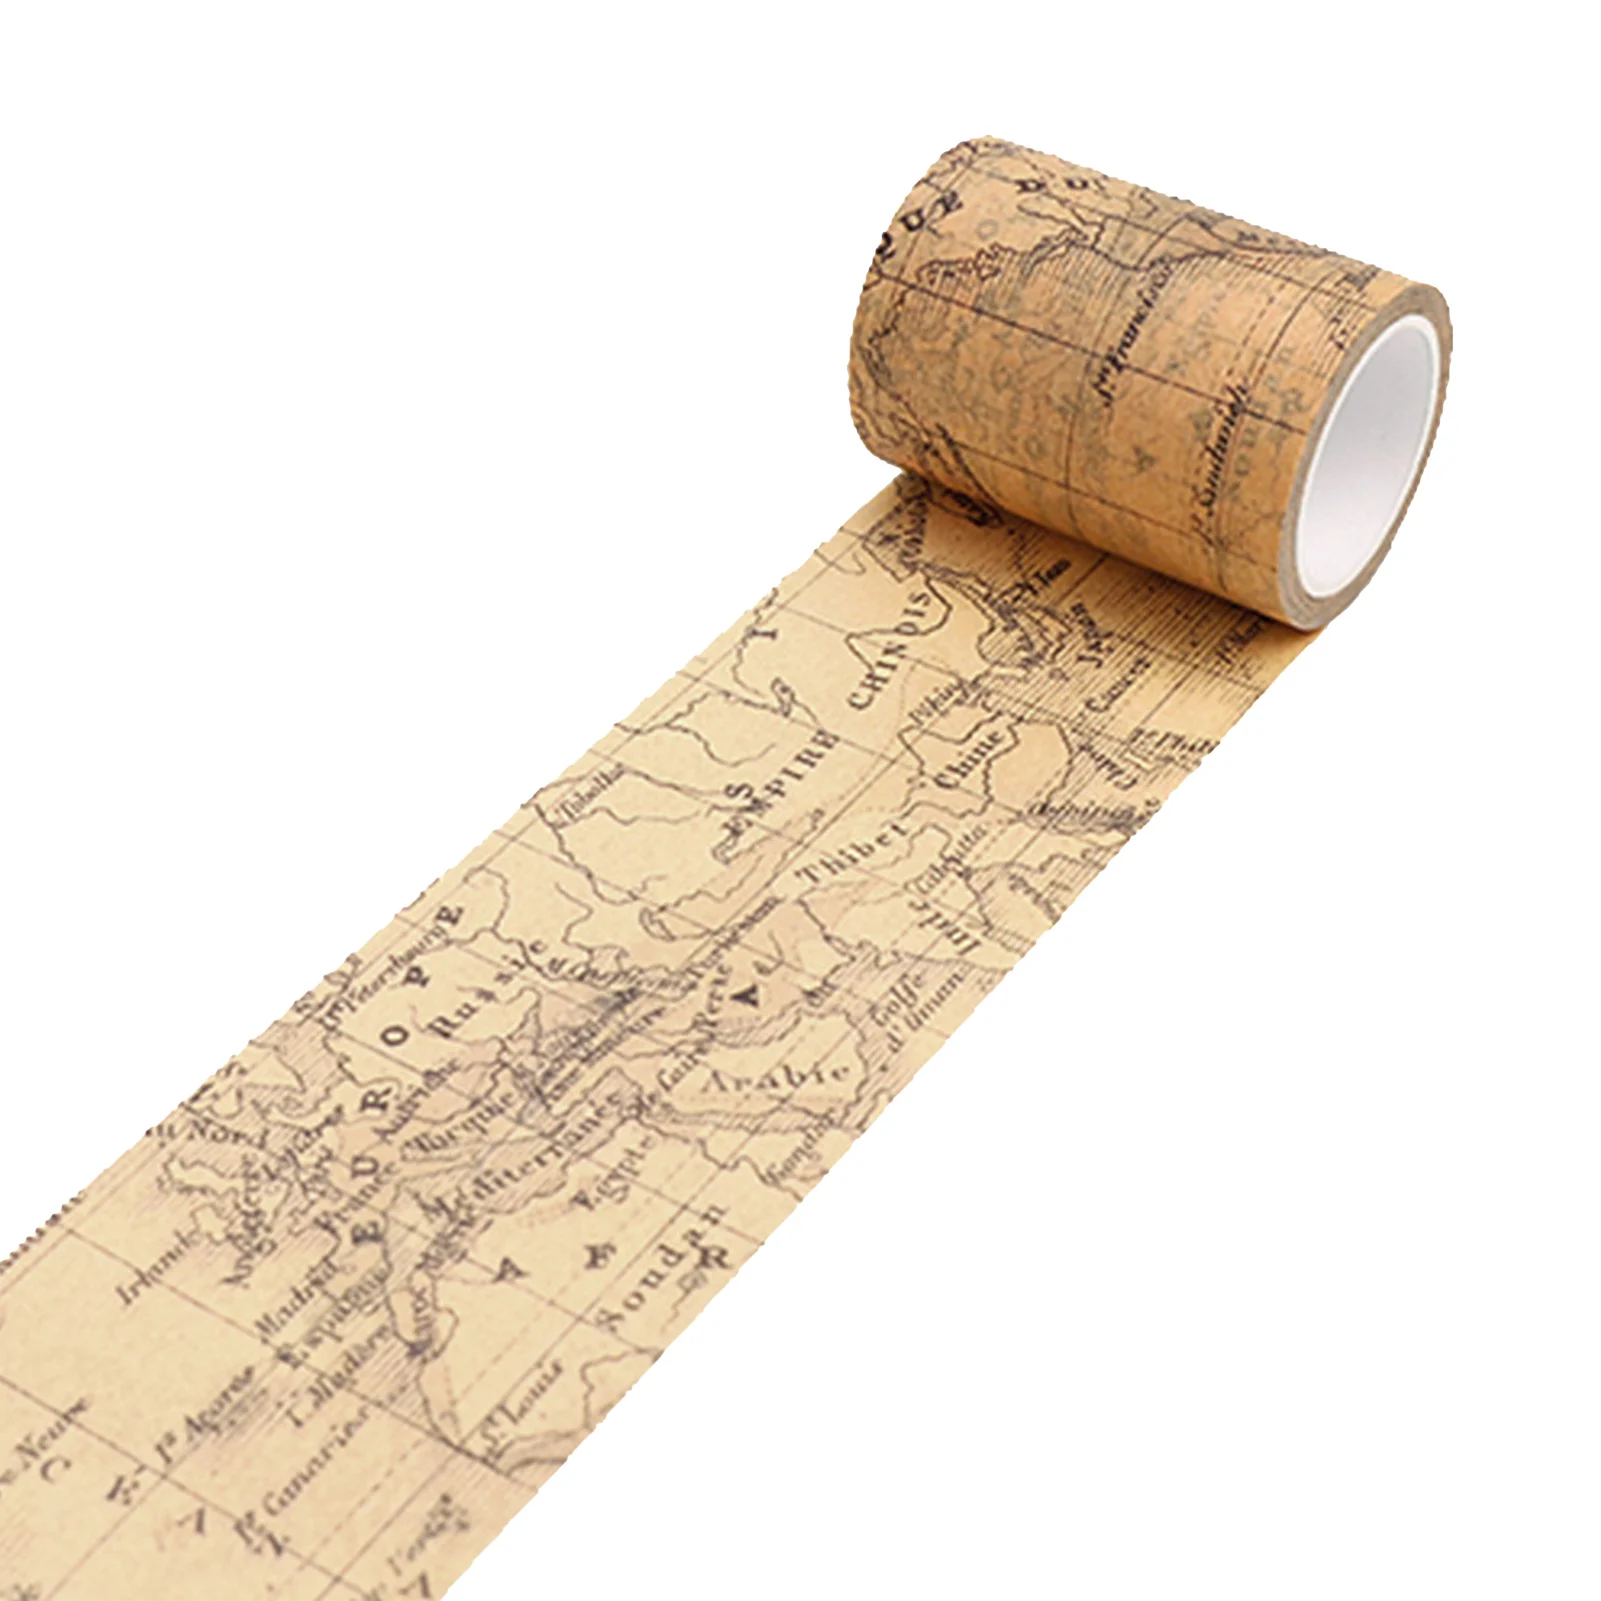 

Washi Tape Stationery Craft For Journaling DIY Decoration Planner Masking Sticker School Free Cut Vintage Style 8m Long